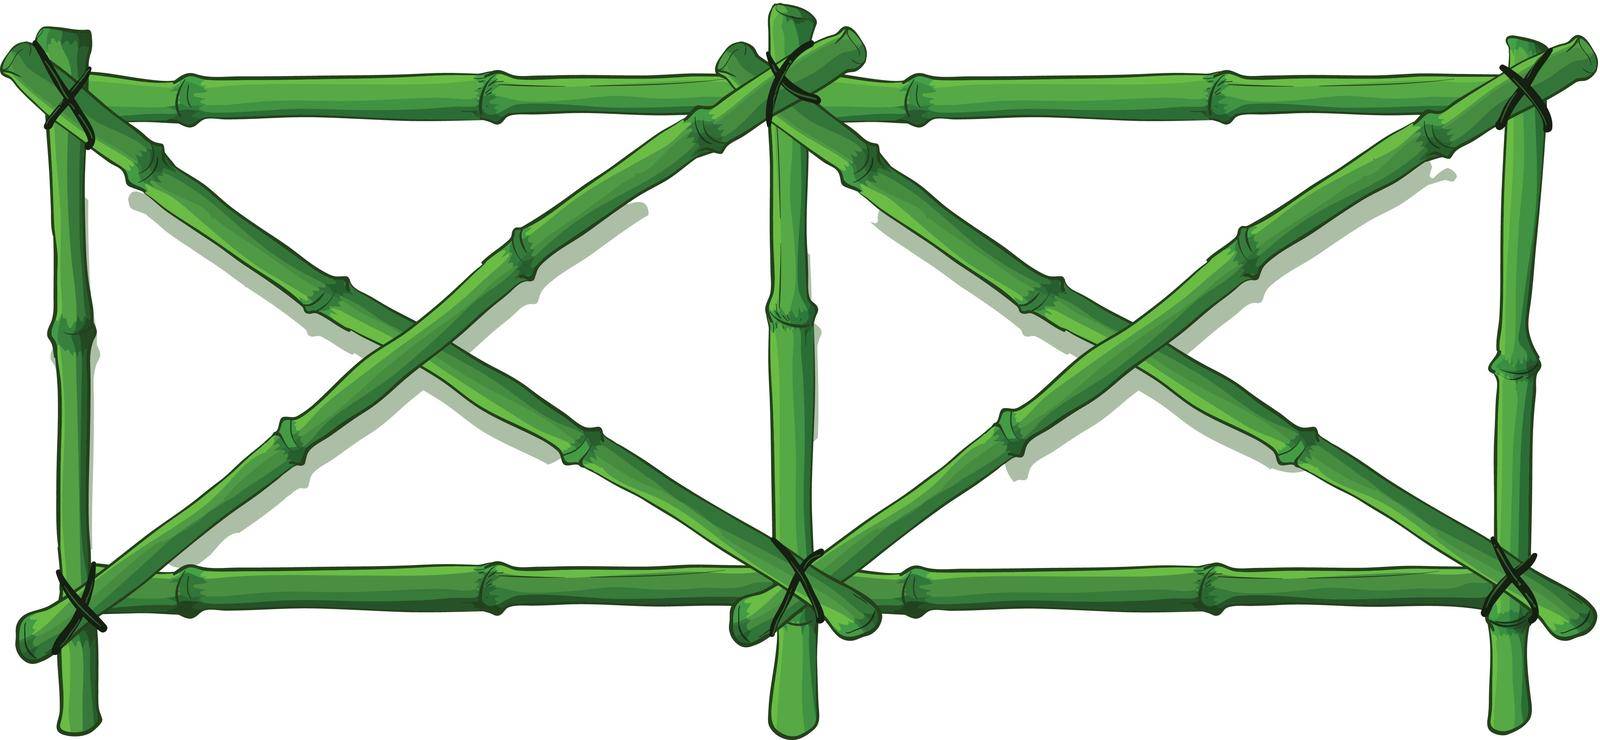 Illustration of a green bamboo fence on a white background